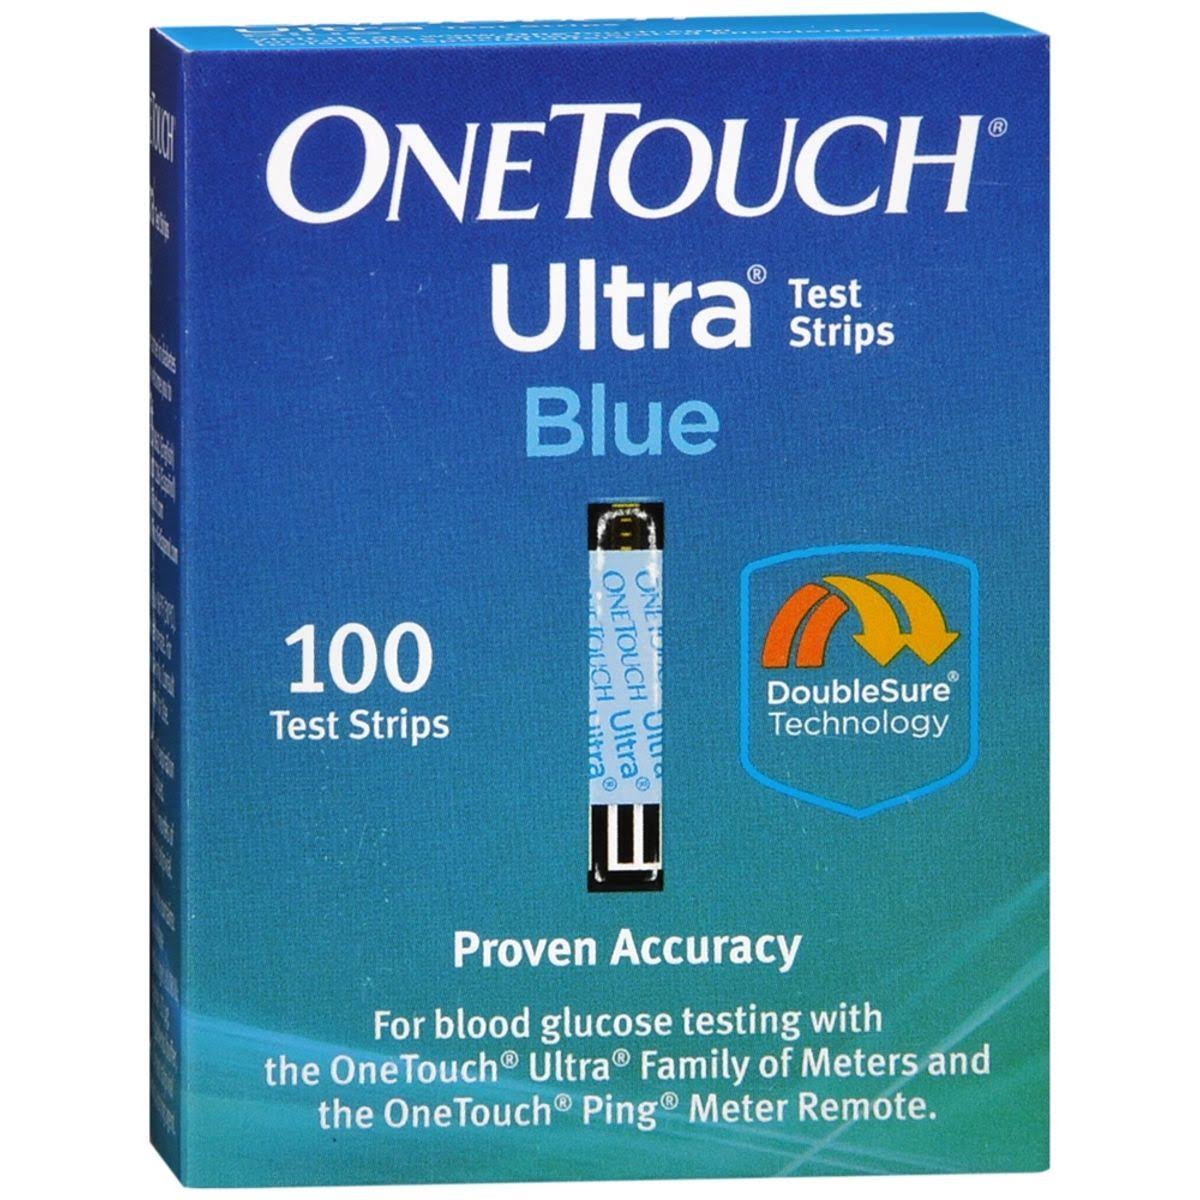 One Touch Ultra Test Stripe - Blue, 100 Strips